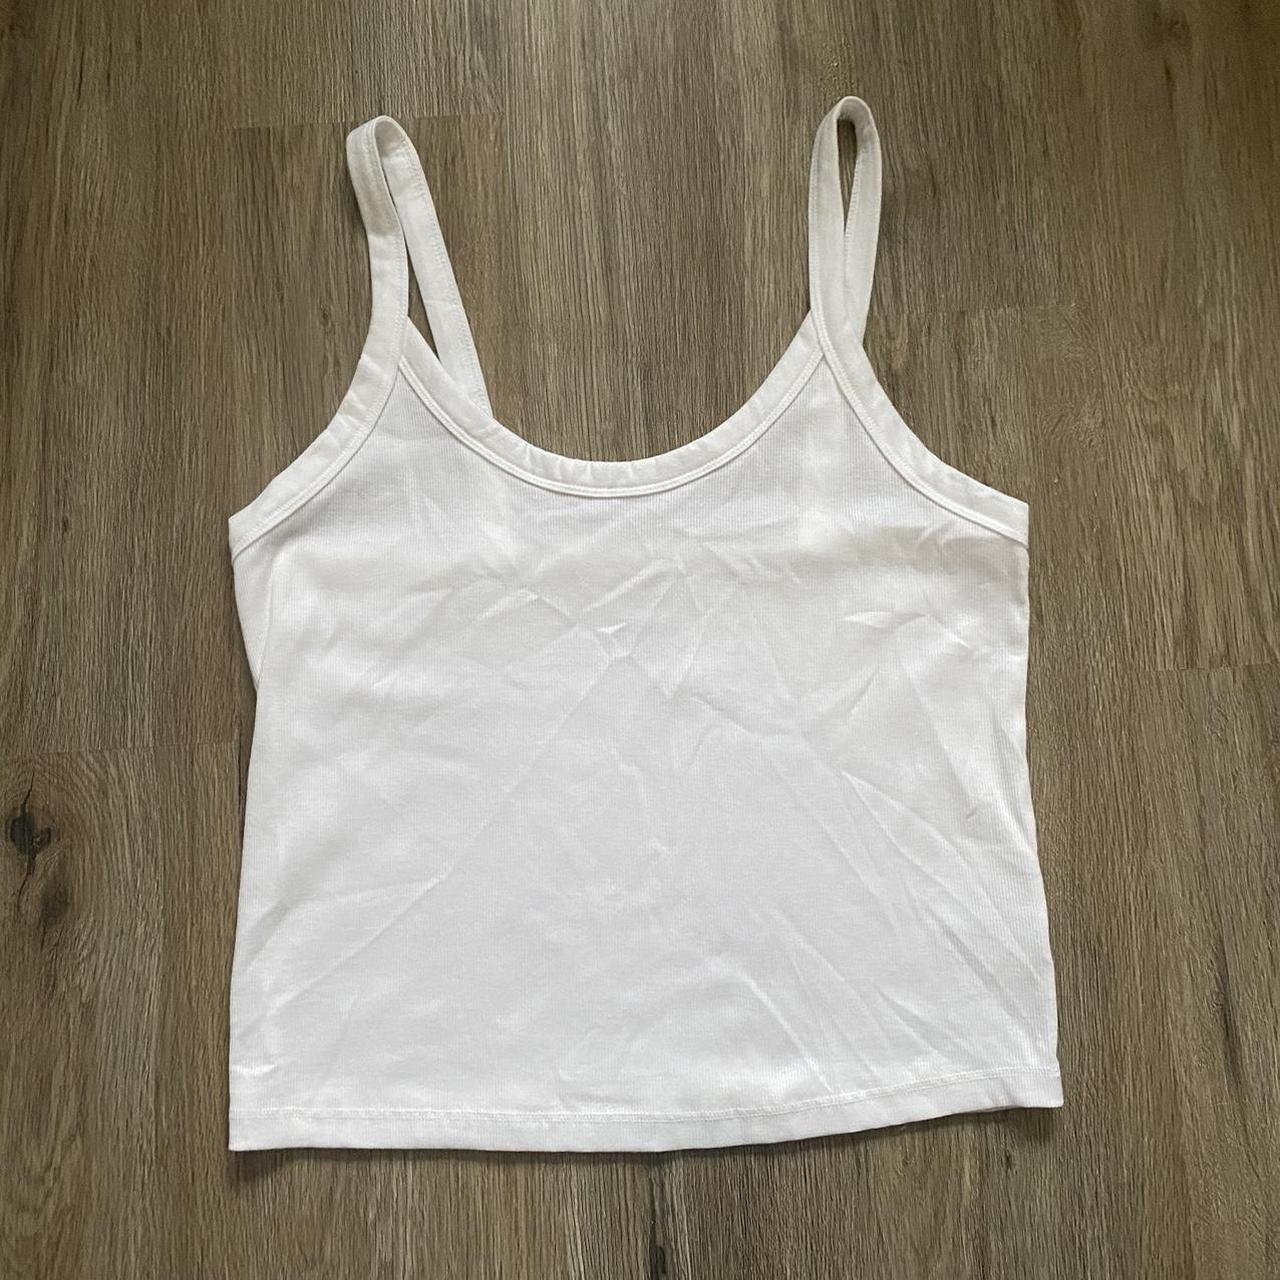 White Wild Fable Tank - size large - thick straps -... - Depop